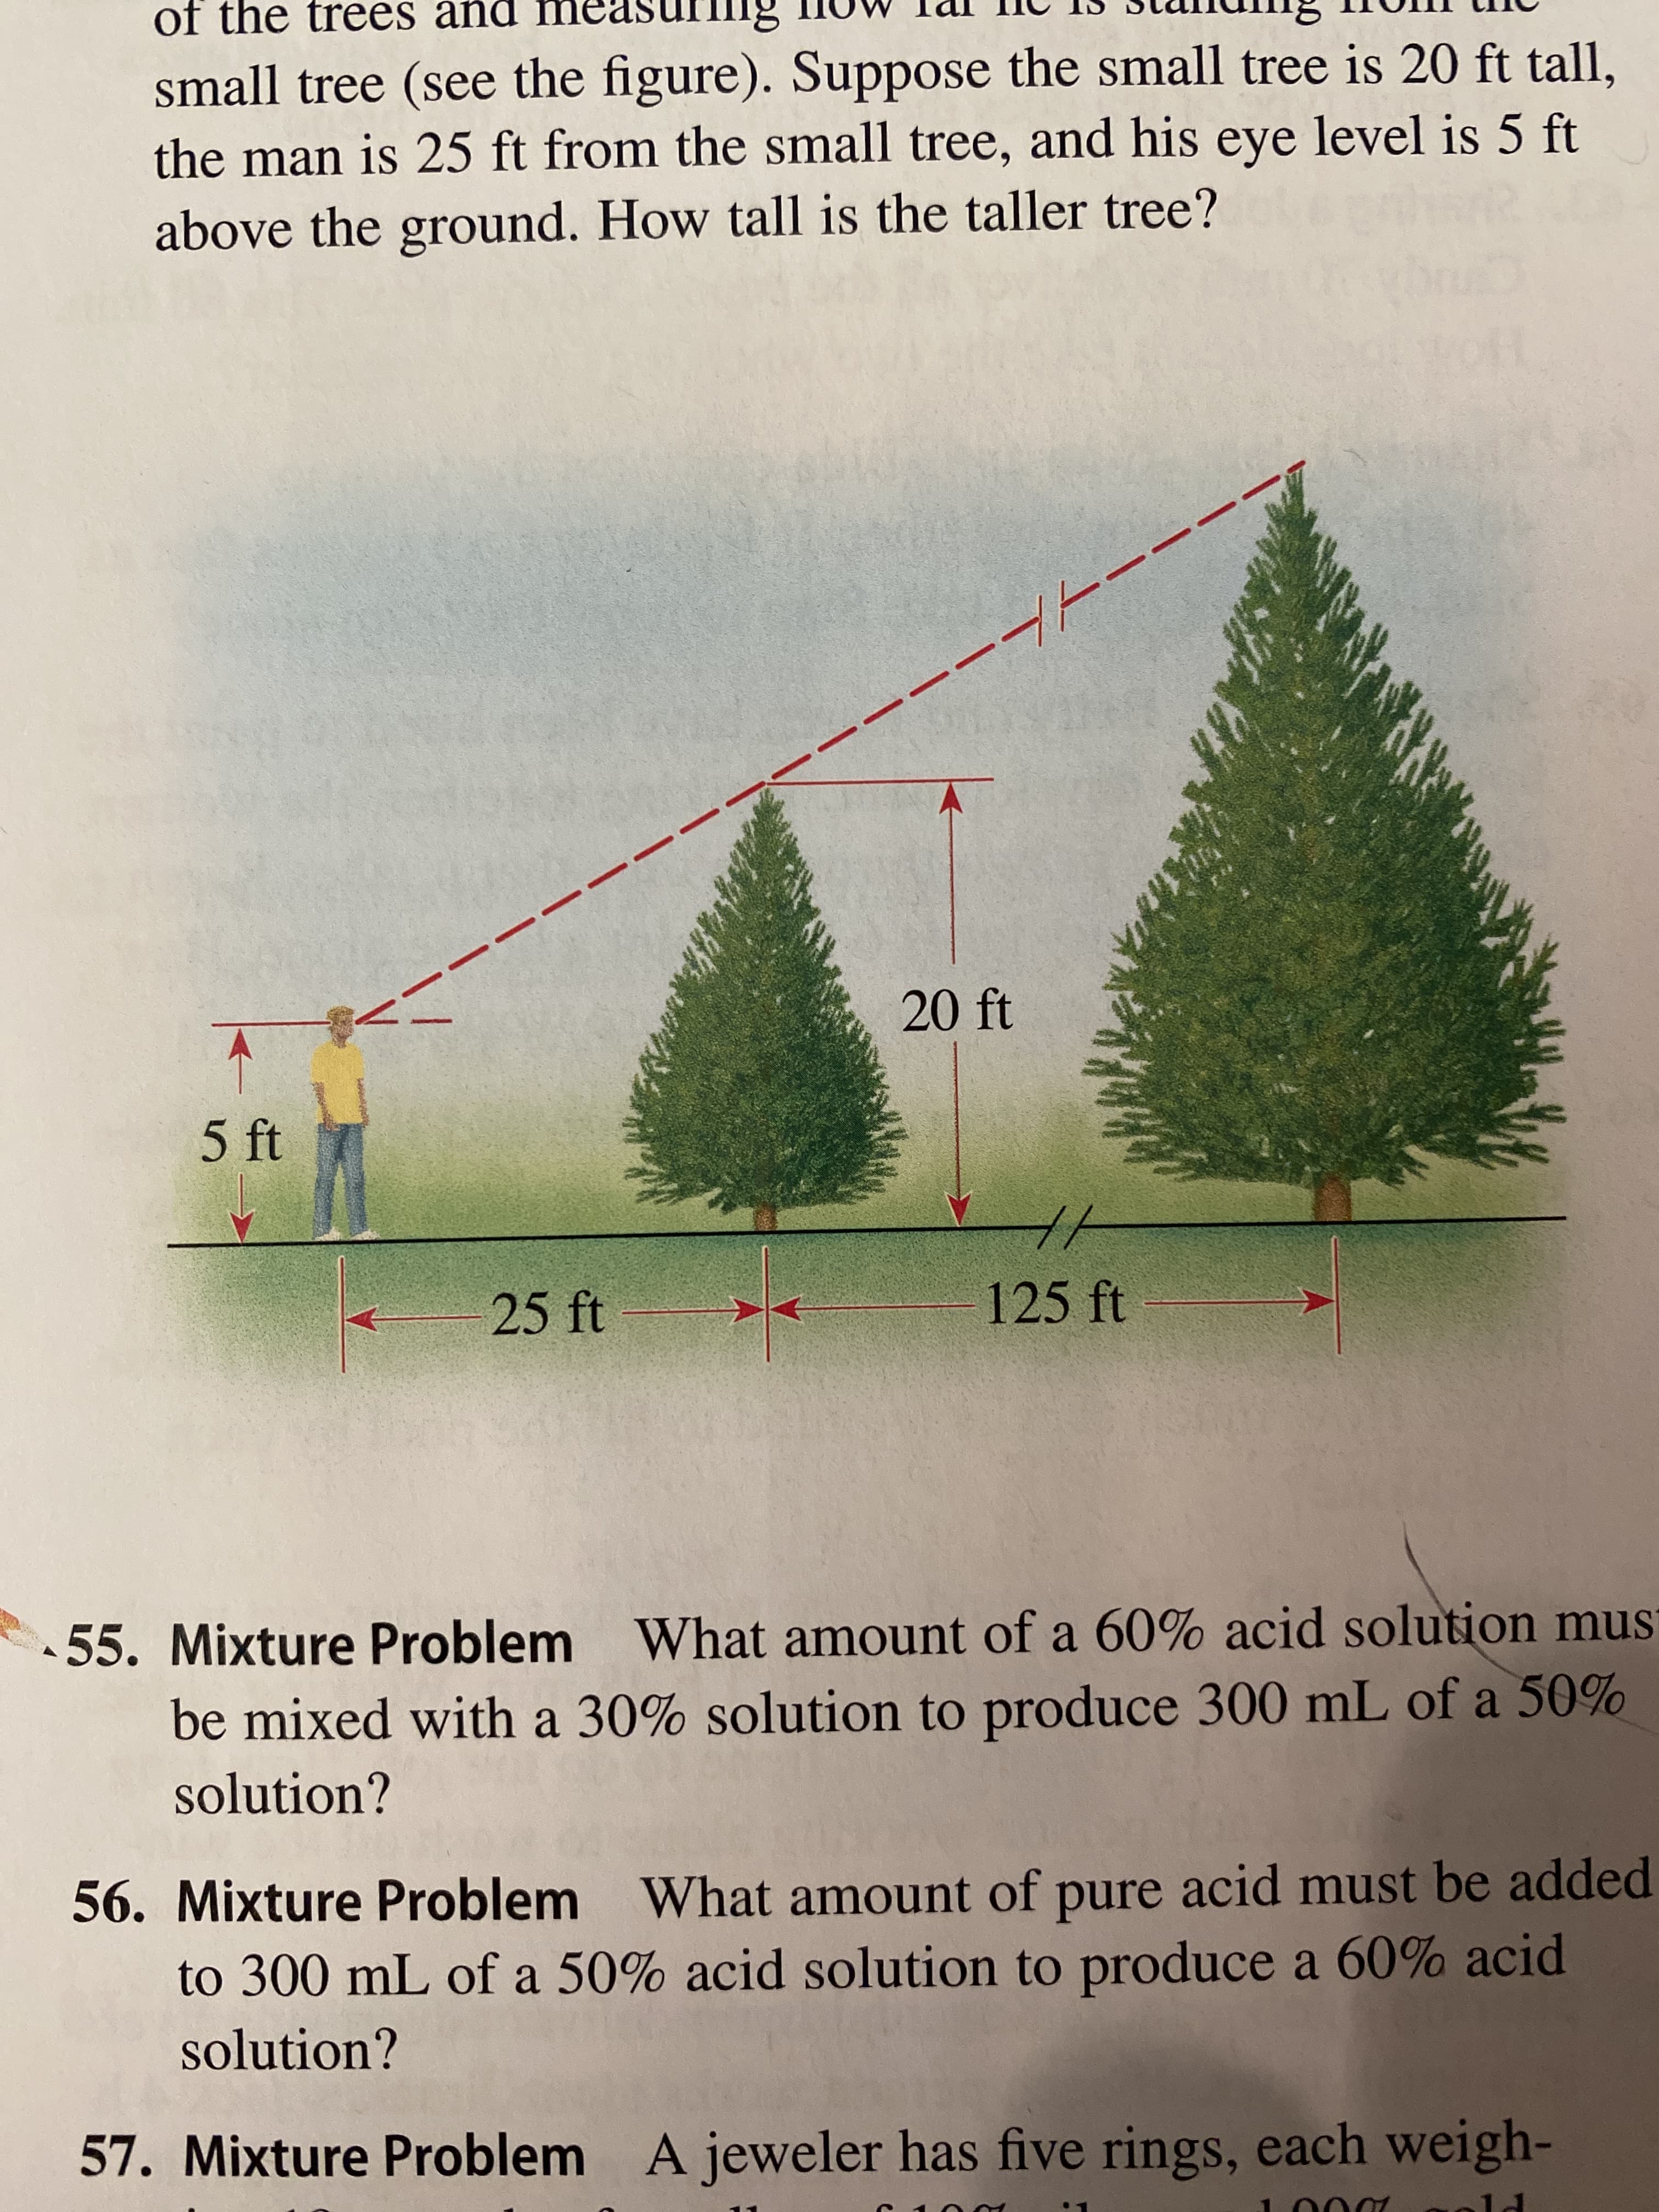 of the trees and
small tree (see the figure). Suppose the small tree is 20 ft tall,
the man is 25 ft from the small tree, and his eye level is 5 ft
above the ground. How tall is the taller tree?
H/-
20 ft
5 ft
25 ft
125 ft-
55. Mixture Problem
What amount of a 60% acid solution mus
be mixed with a 30% solution to produce 300 mL of a 50%
solution?
56. Mixture Problem
What amount of pure acid must be added
to 300 mL of a 50% acid solution to produce a 60% acid
solution?
57. Mixture Problem
A jeweler has five rings, each weigh-
